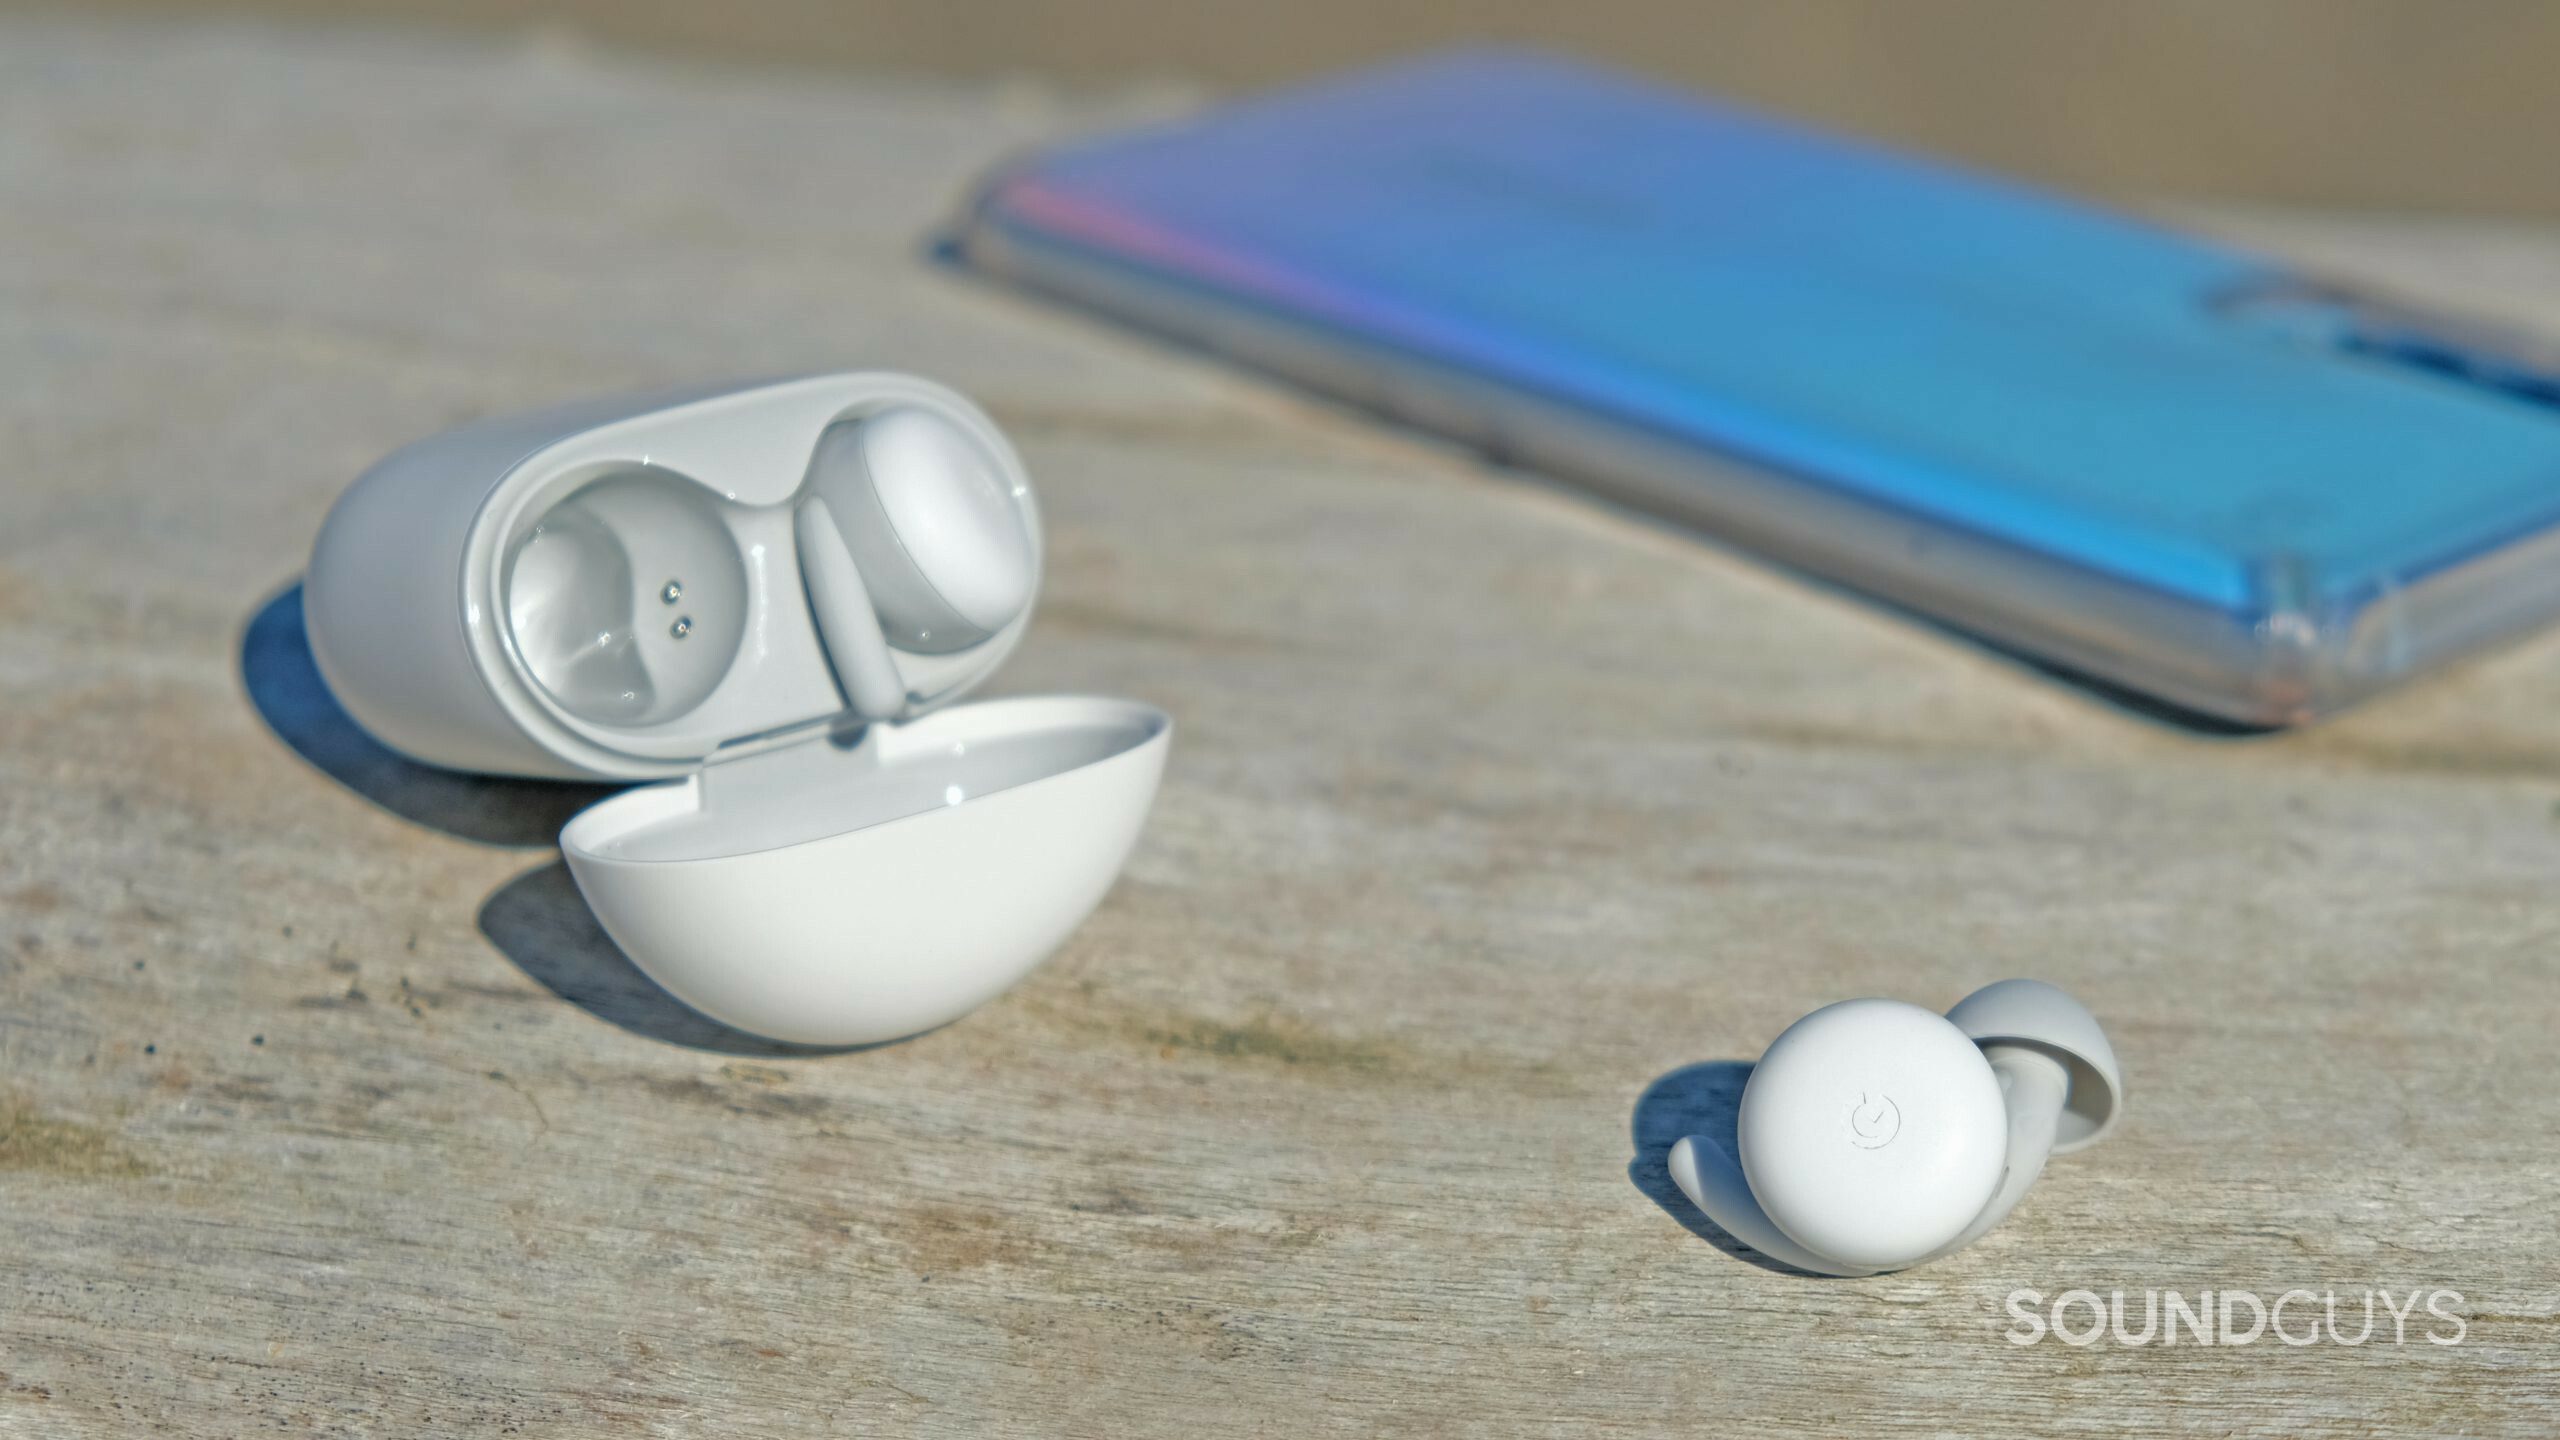 Here's a close up of the Google Pixel Buds A-Series on driftwood with a smartphone.